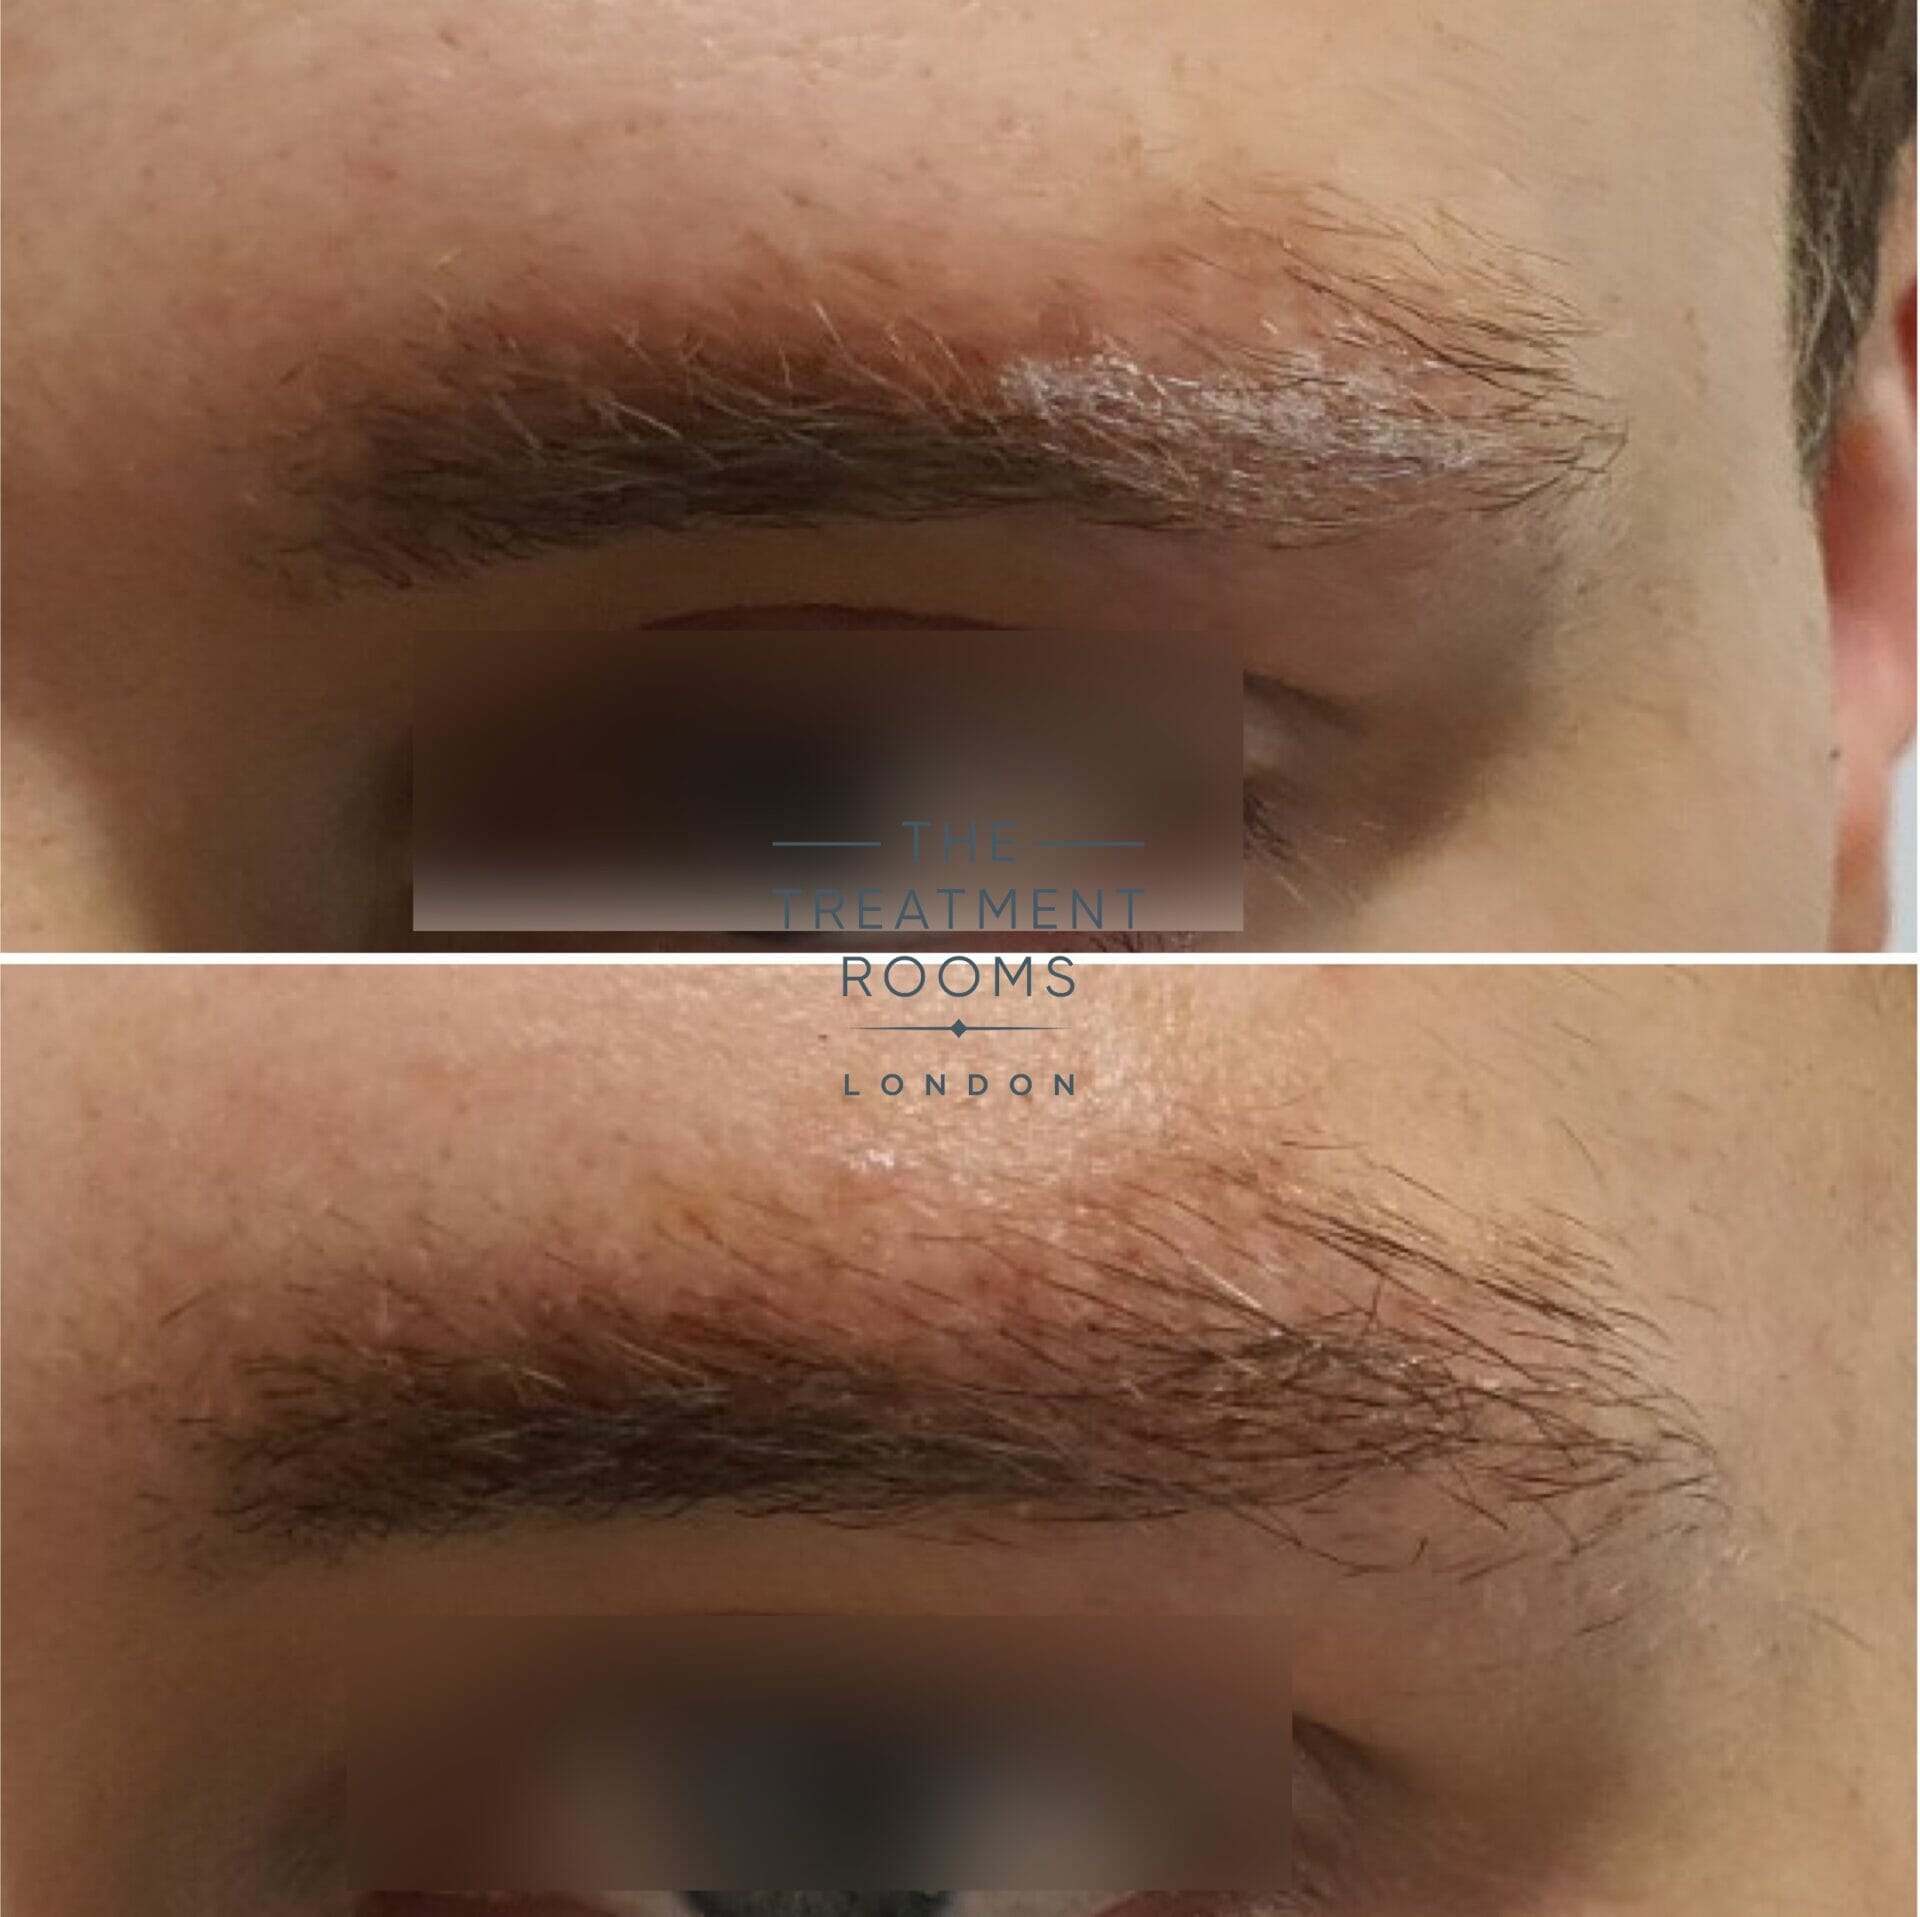 eyebrow hair transplant before and after